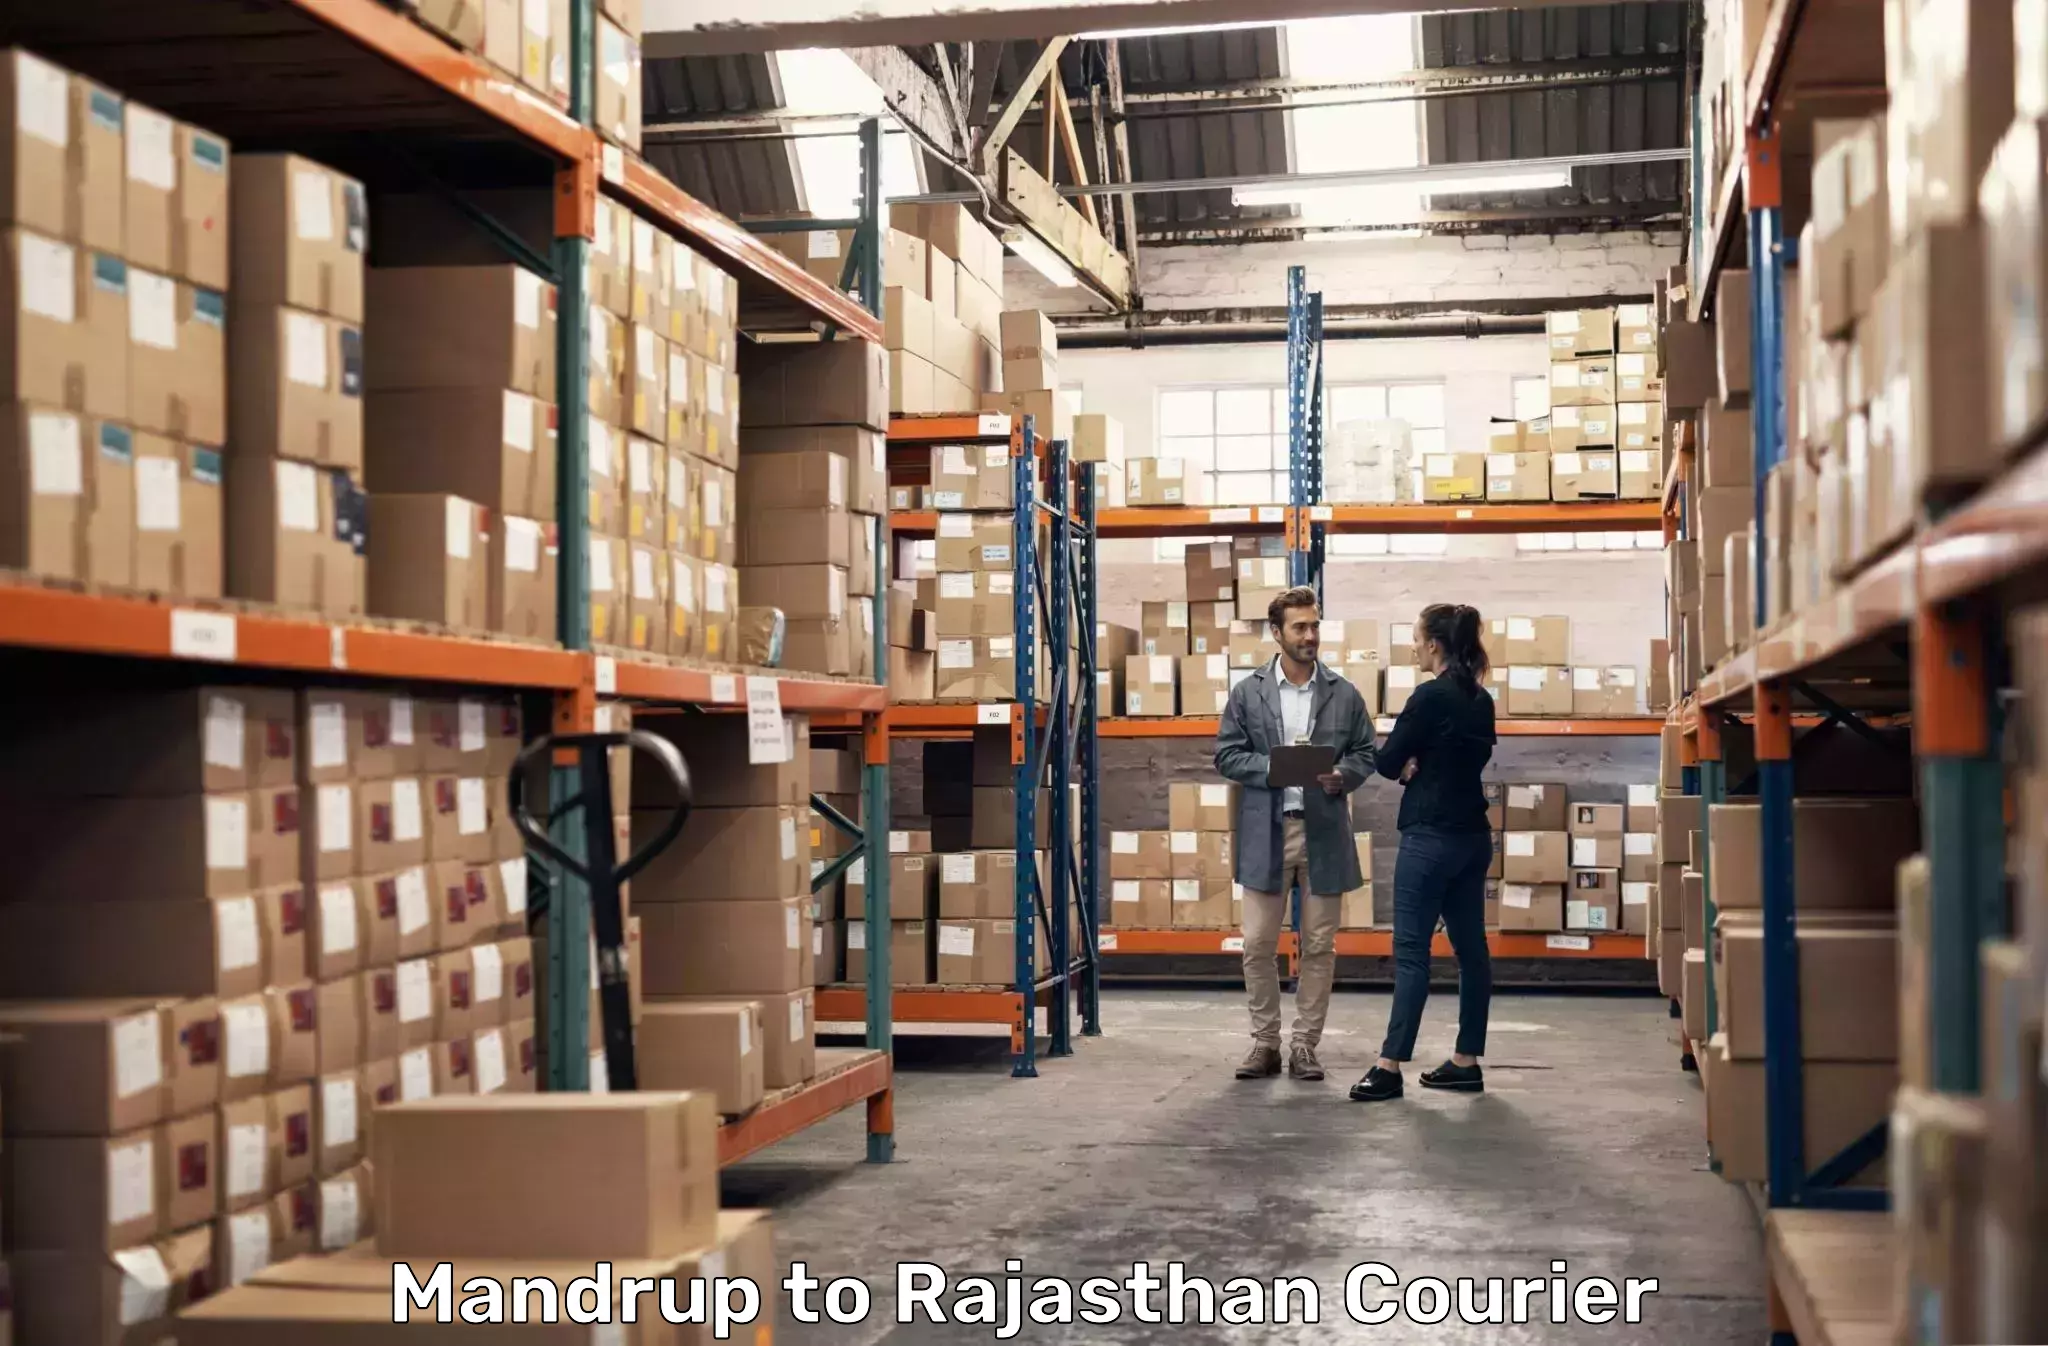 Online package tracking Mandrup to Jaipur